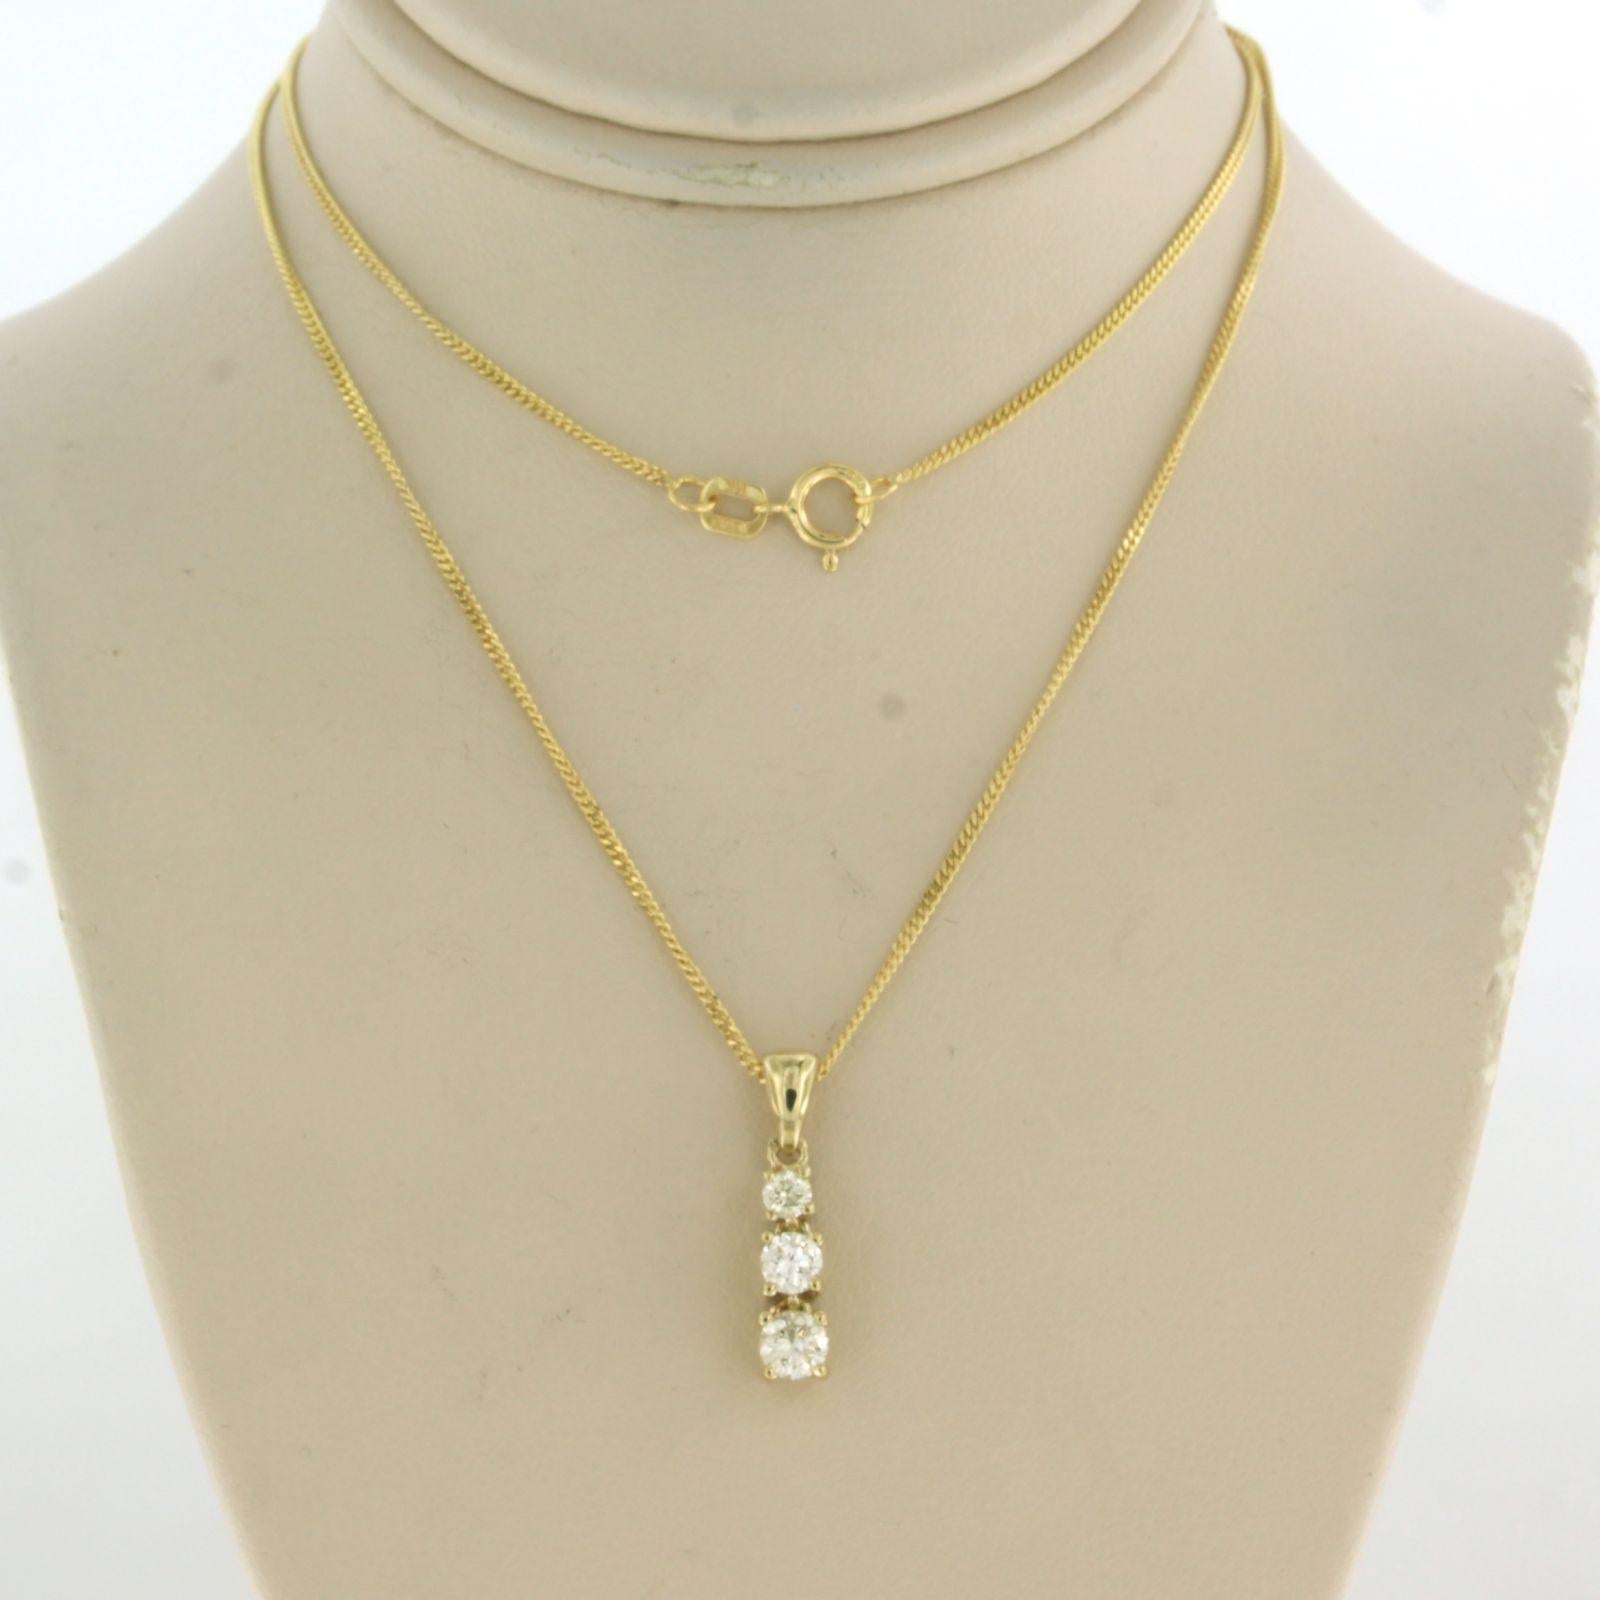 14k yellow gold necklace with a pendant set with brilliant cut diamonds. 0.45ct - J/K - VS/SI - 45 cm long

detailed description:

the necklace is 45 cm long and 0.7 mm wide

the pendant is 1.7 cm long by 4.0 mm wide

weight 3.0 grams

occupied